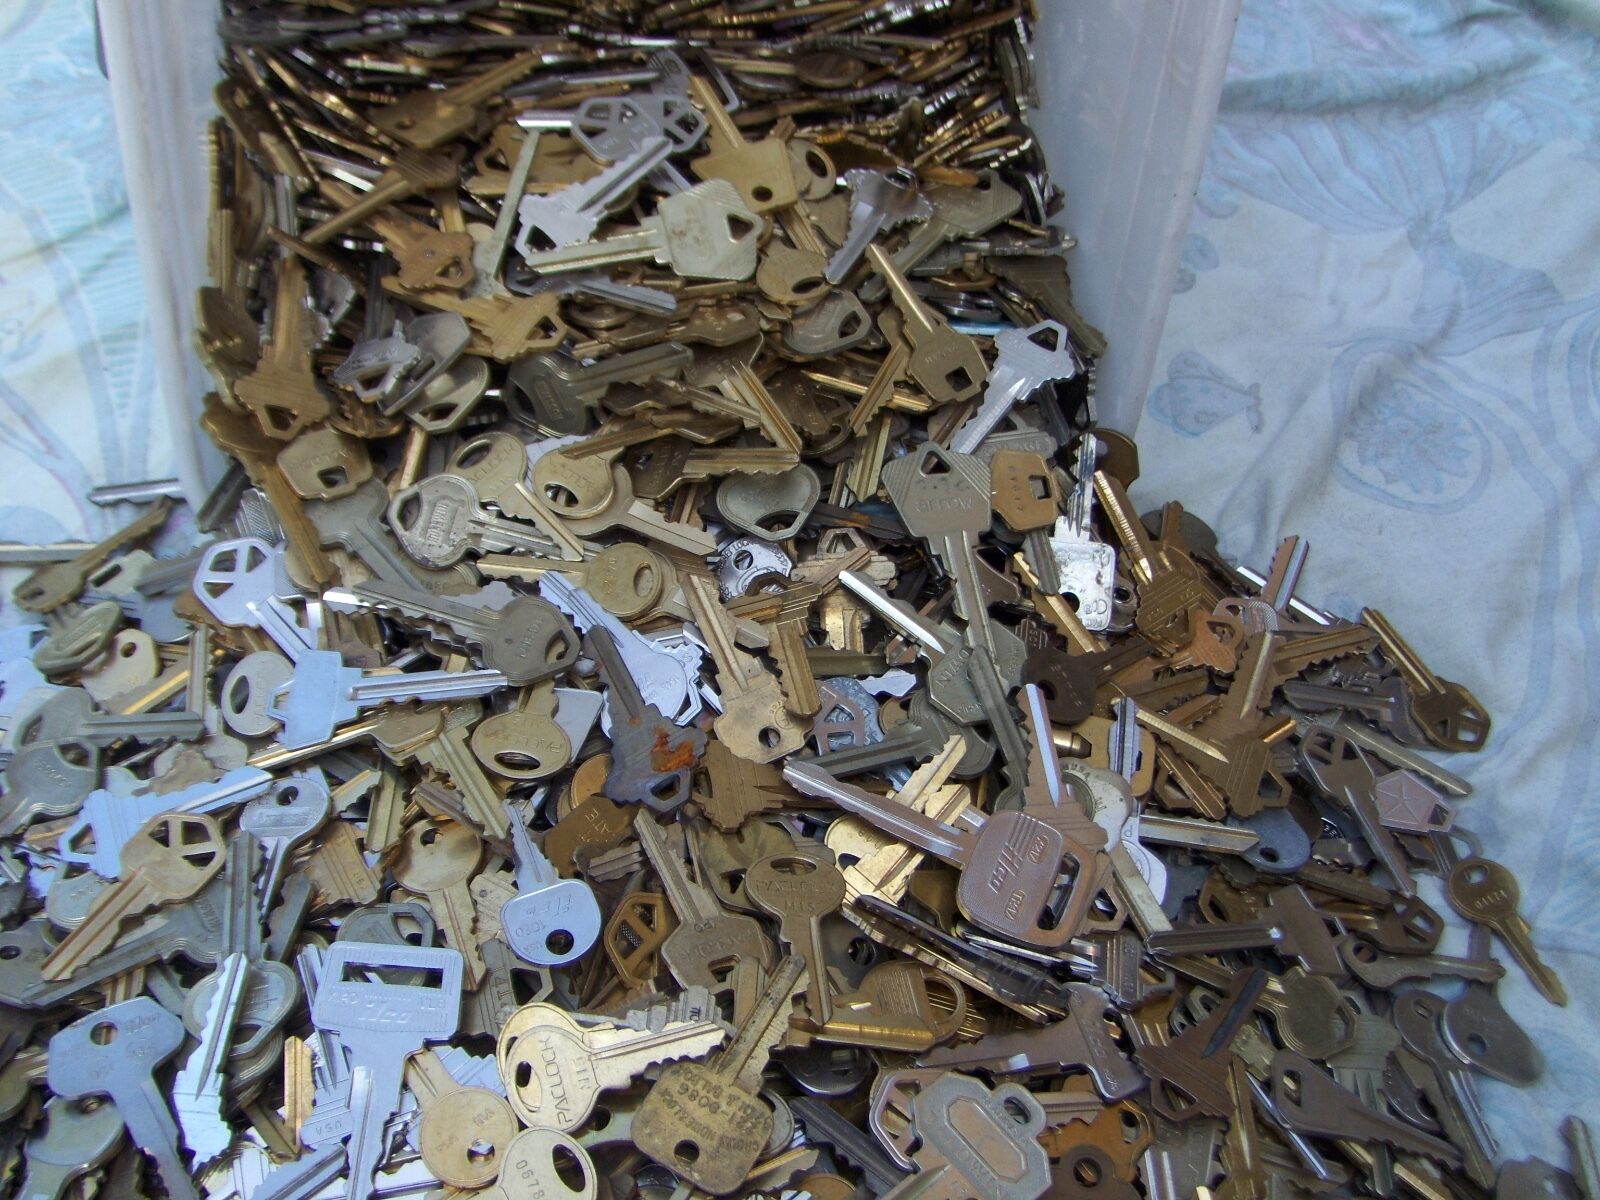   Lot of  Misc Cut  Keys 1.5 Pounds (LBS)  HOUSE,CARS.  Some old Art Craft..    